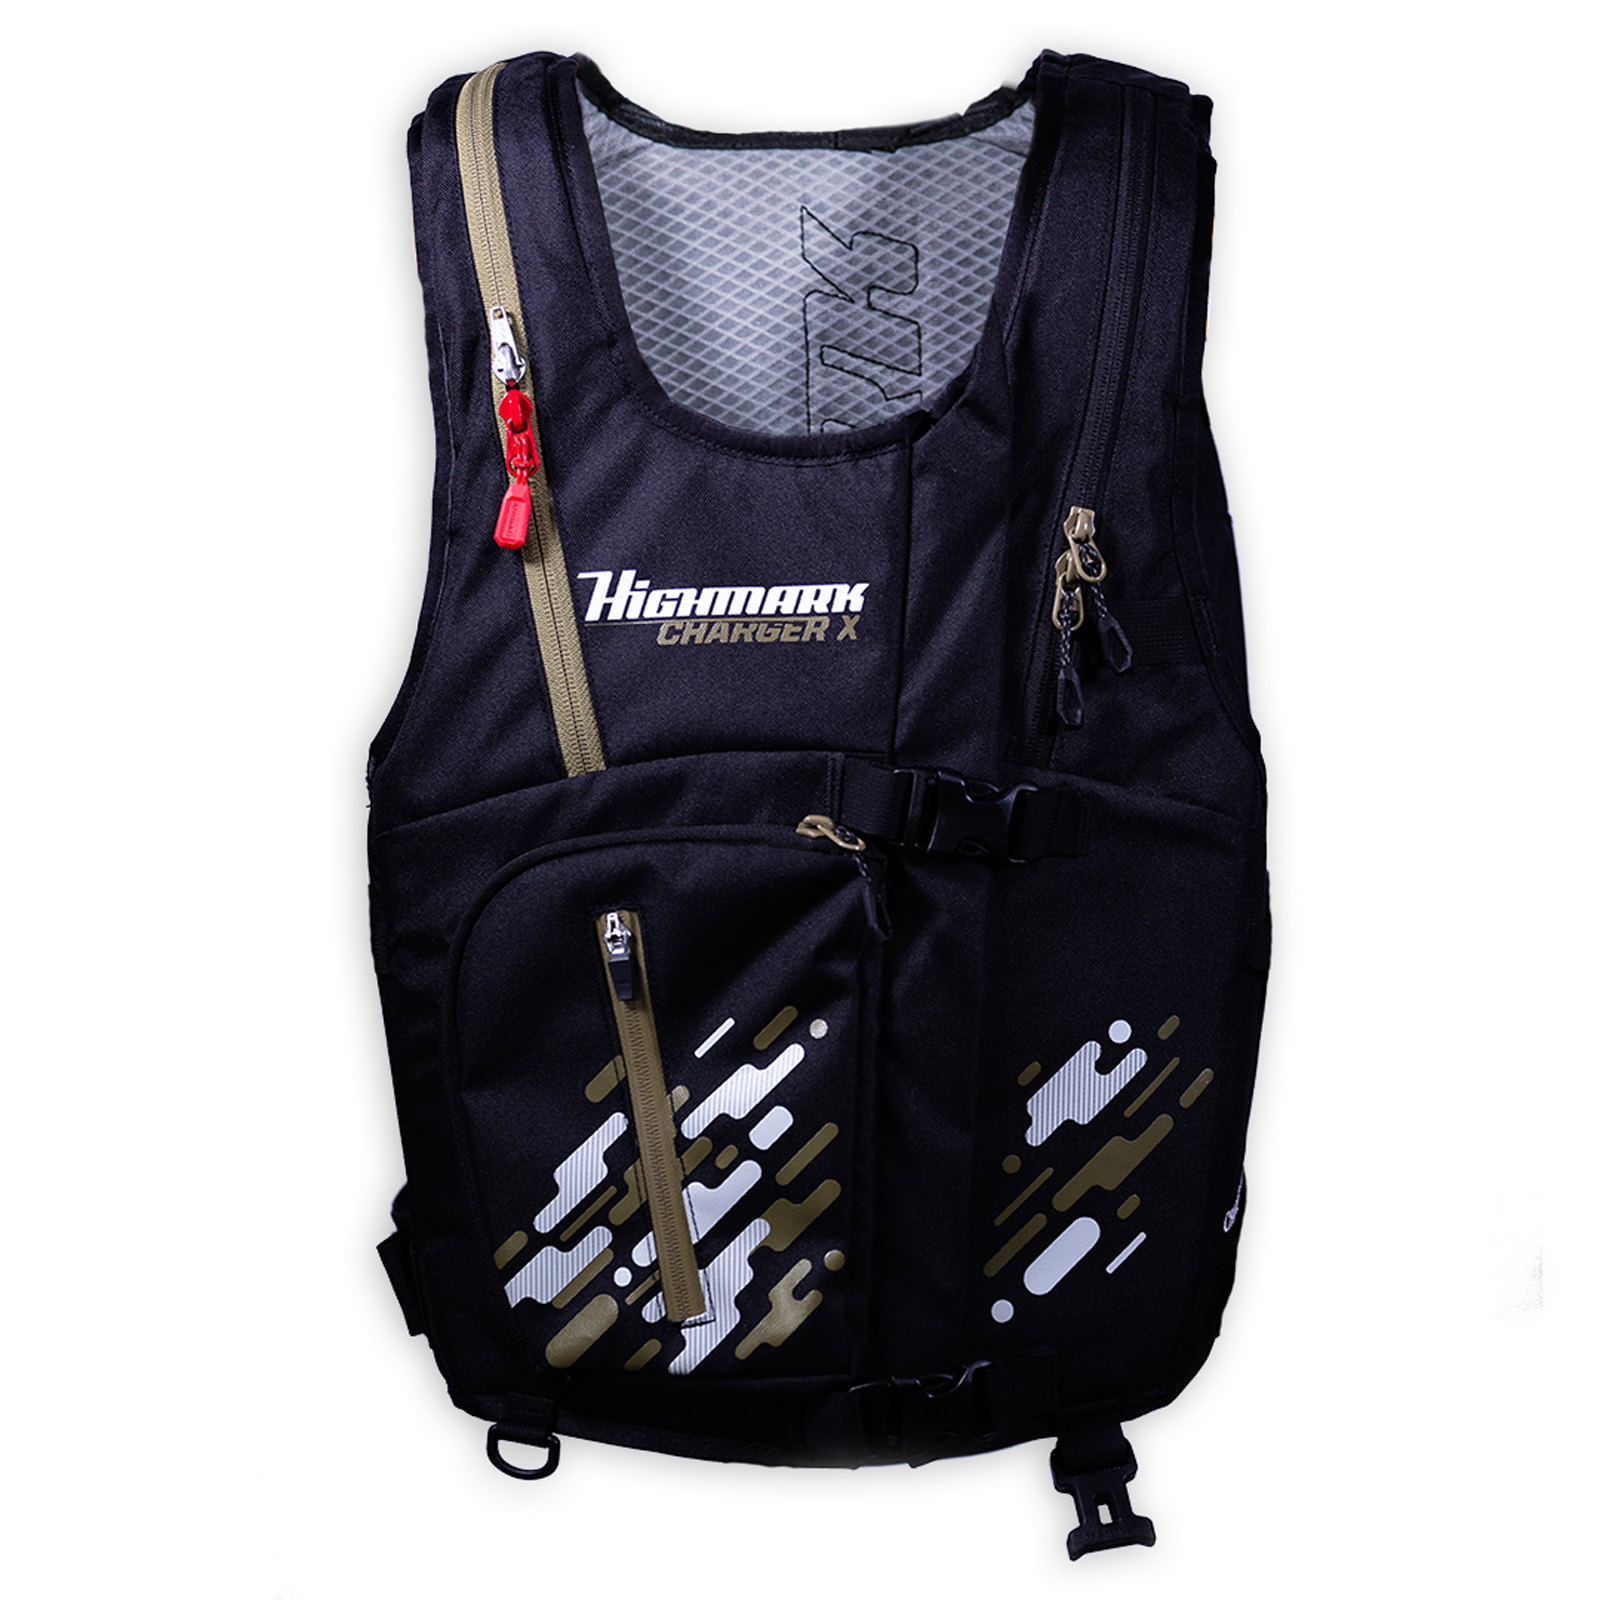 Snowpulse Highmark Charger Vest 3.0 Avalanche Airbag